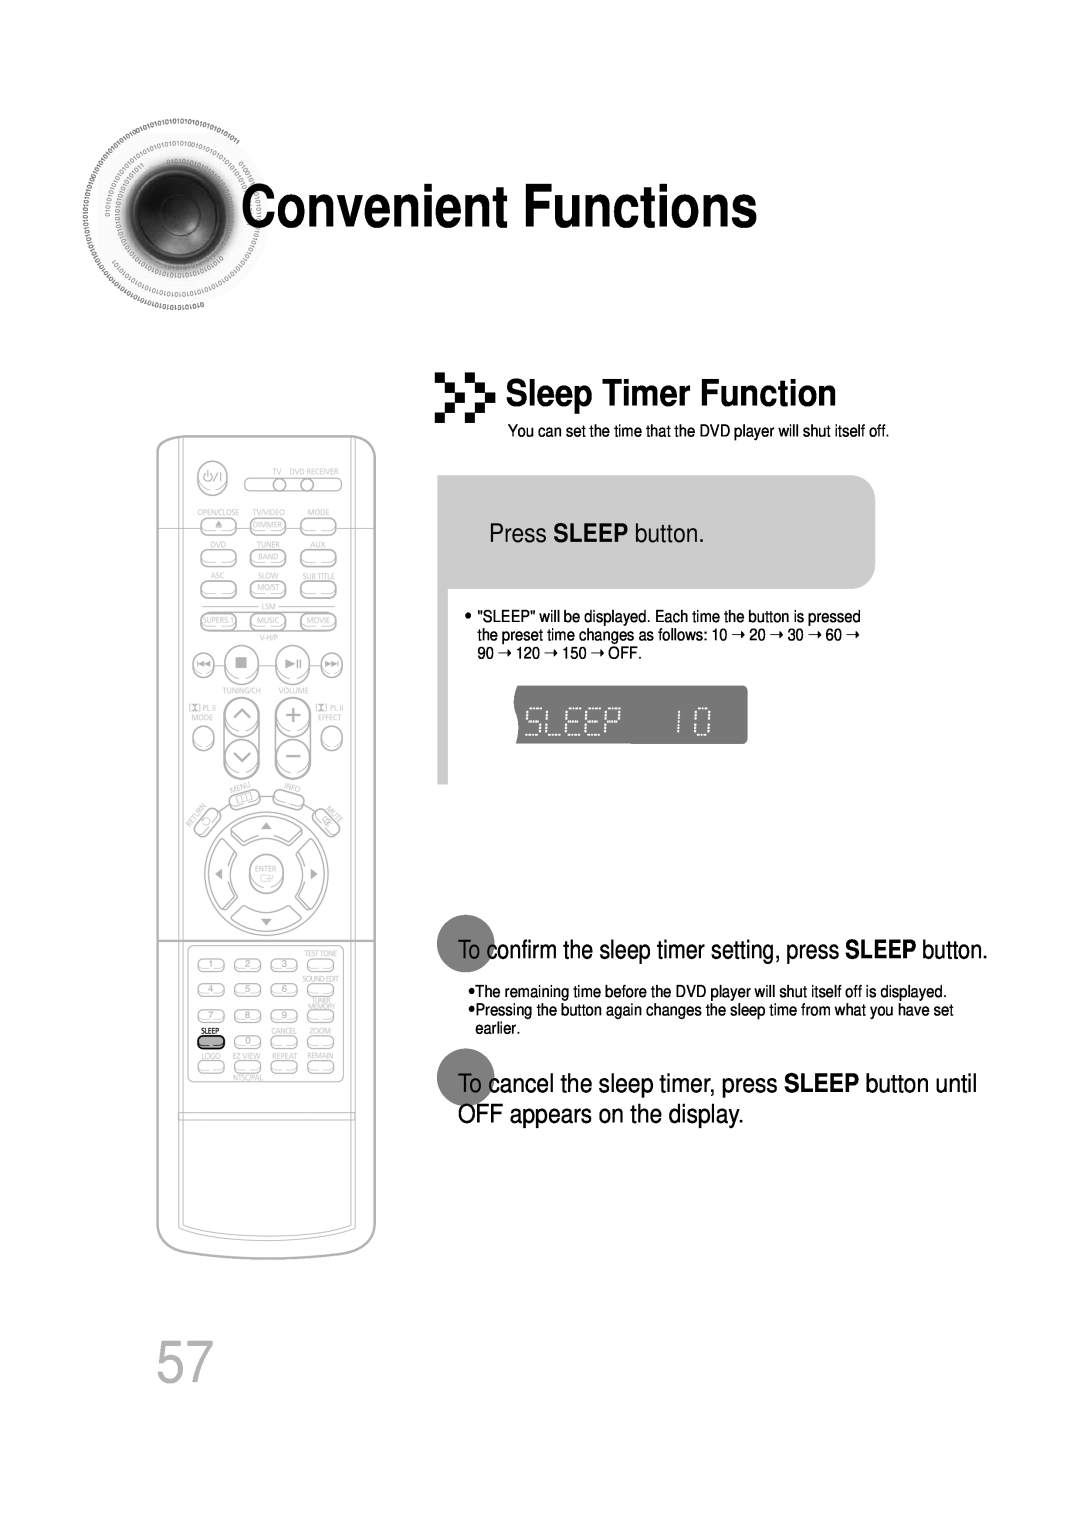 Samsung HT-DB350, HT-DB1650 ConvenientFunctions, Sleep Timer Function, Press SLEEP button, OFF appears on the display 